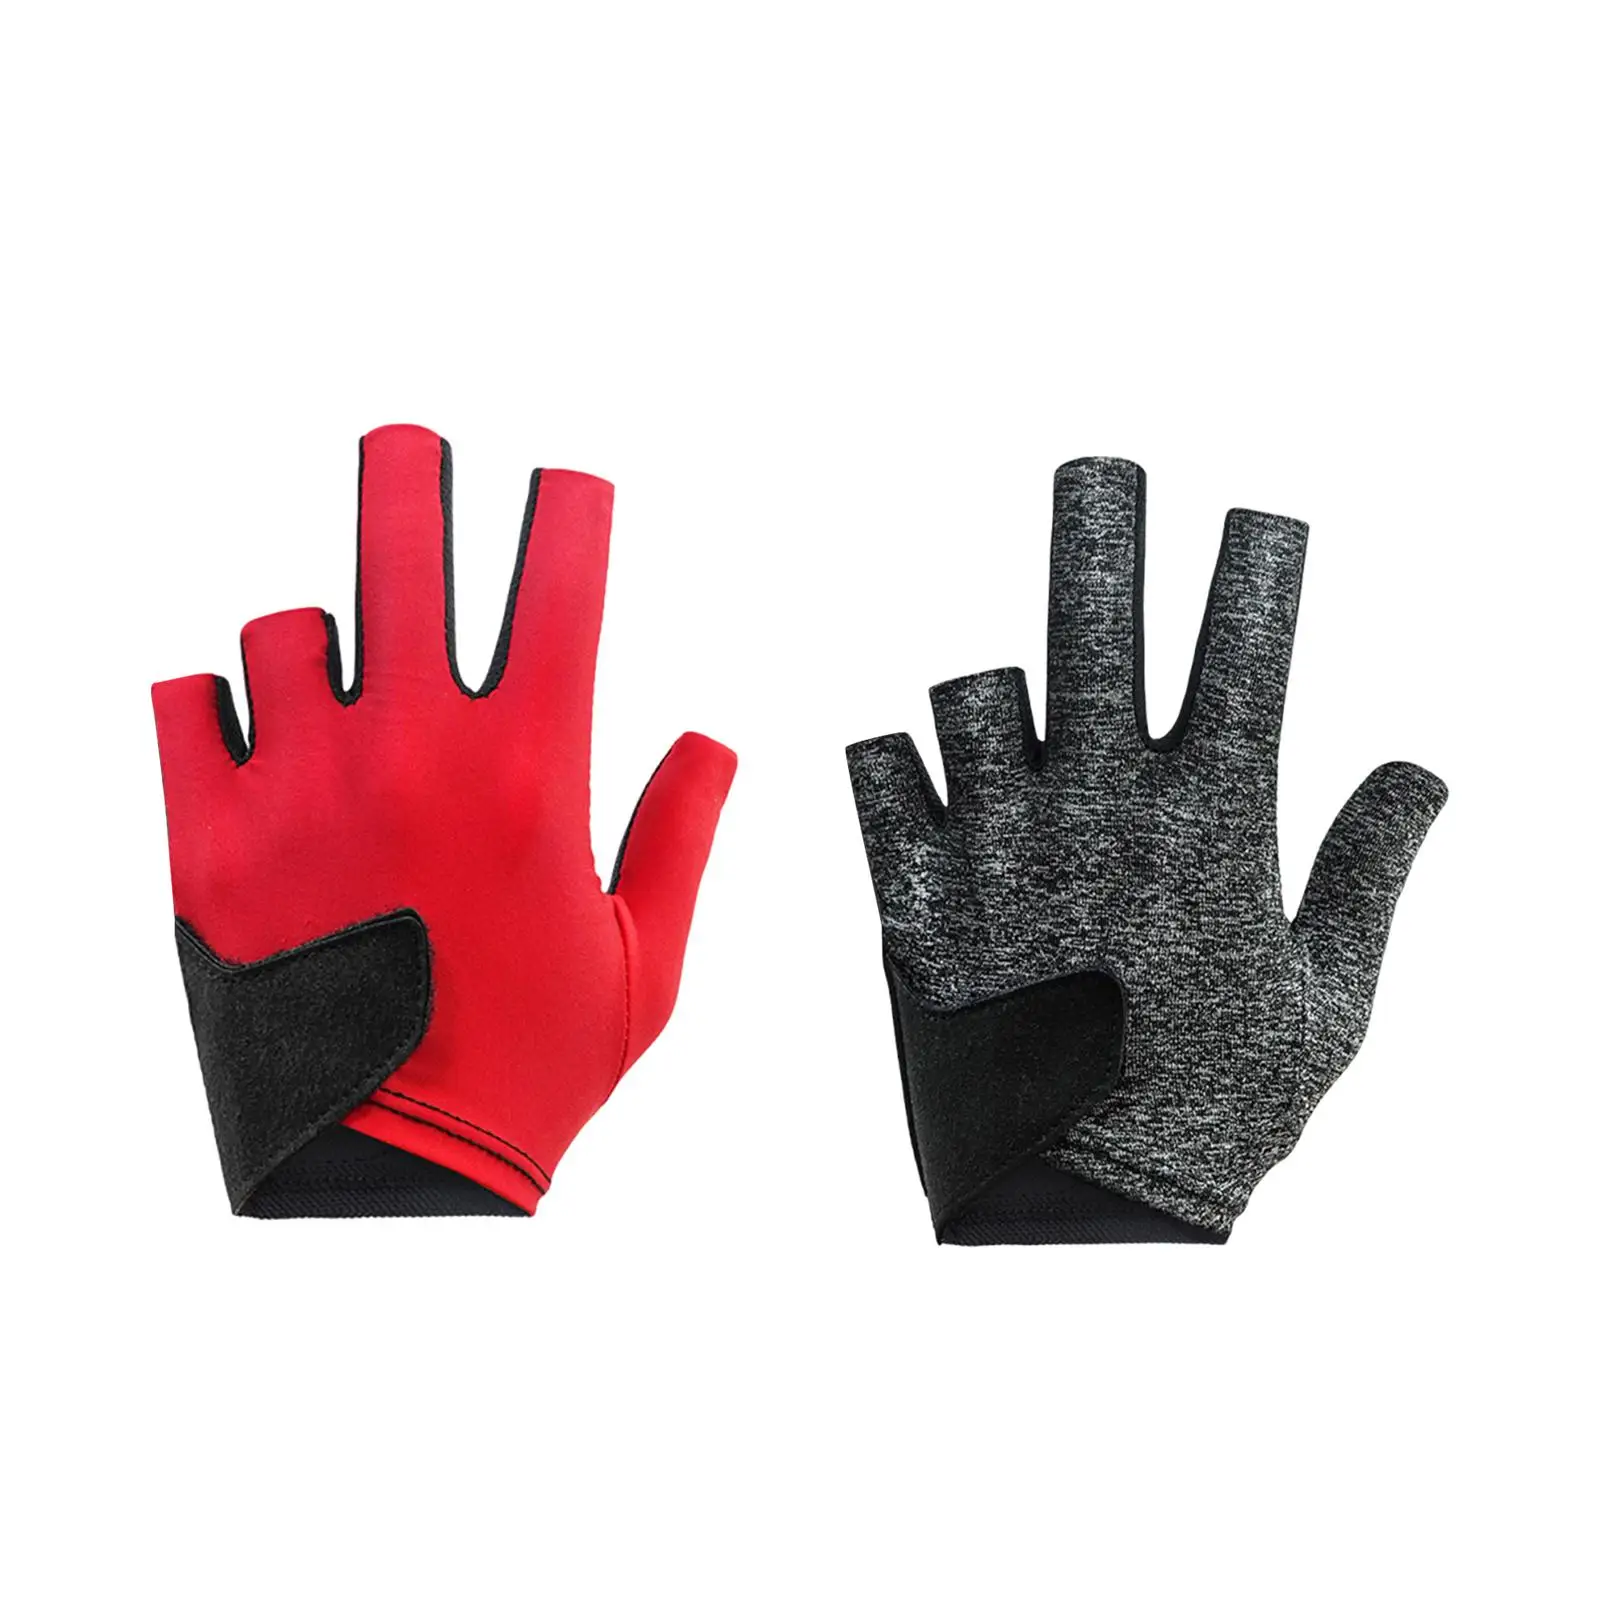 Billiards Glove Left Hand Professional Non Slip Snooker Sport Glove Pool Glove Five Finger for Shooters Teens Sports Accessories